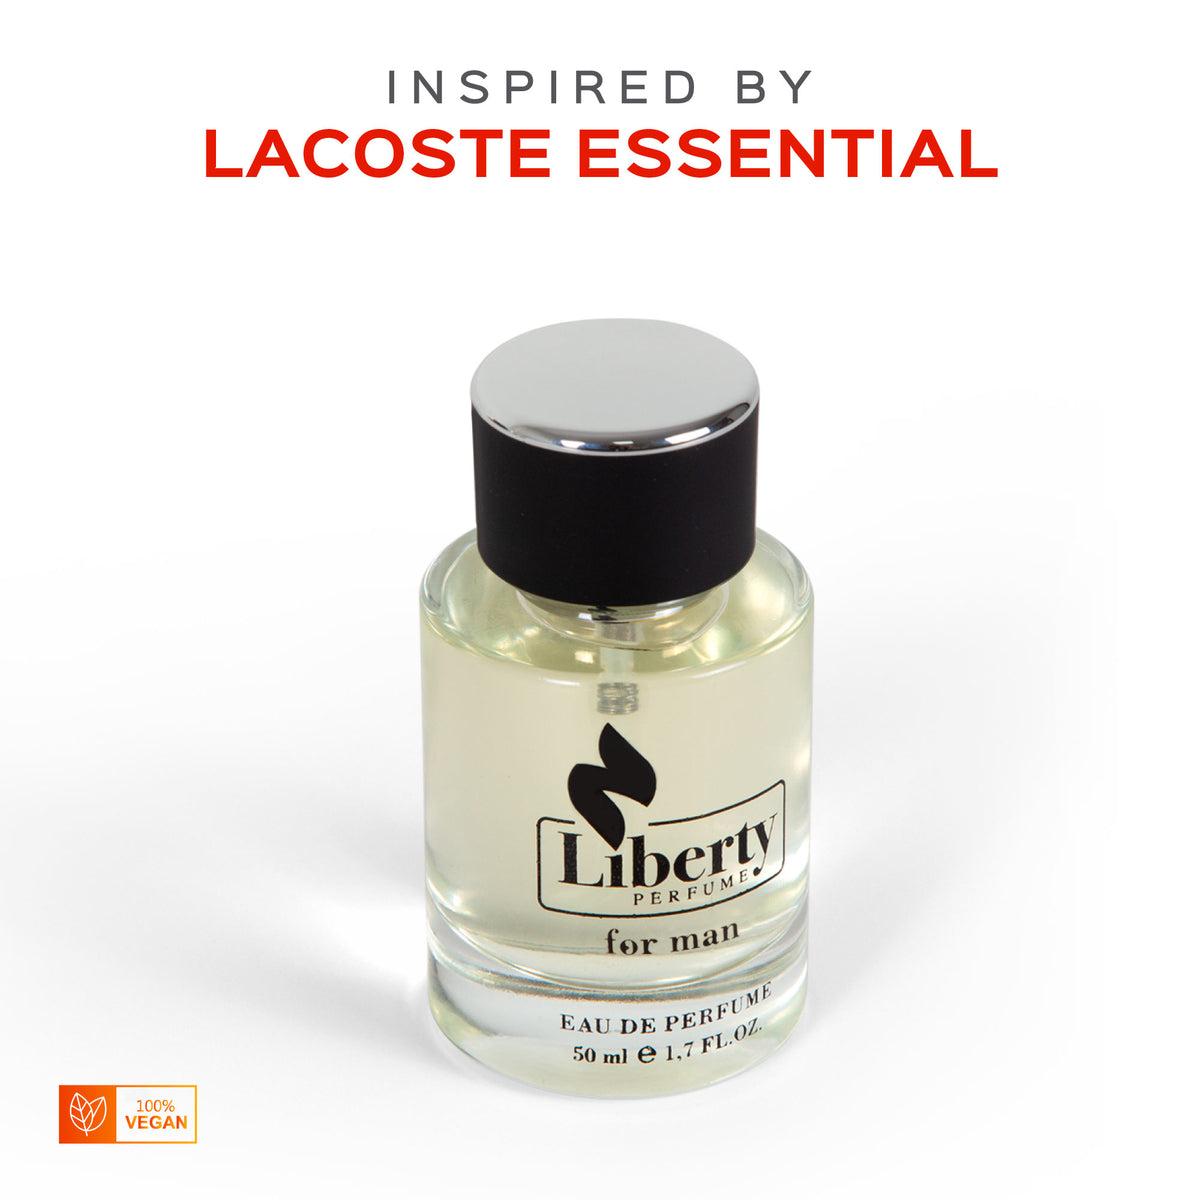 M21 Essential for Men Perfume - Inspired by Lacoste Essential